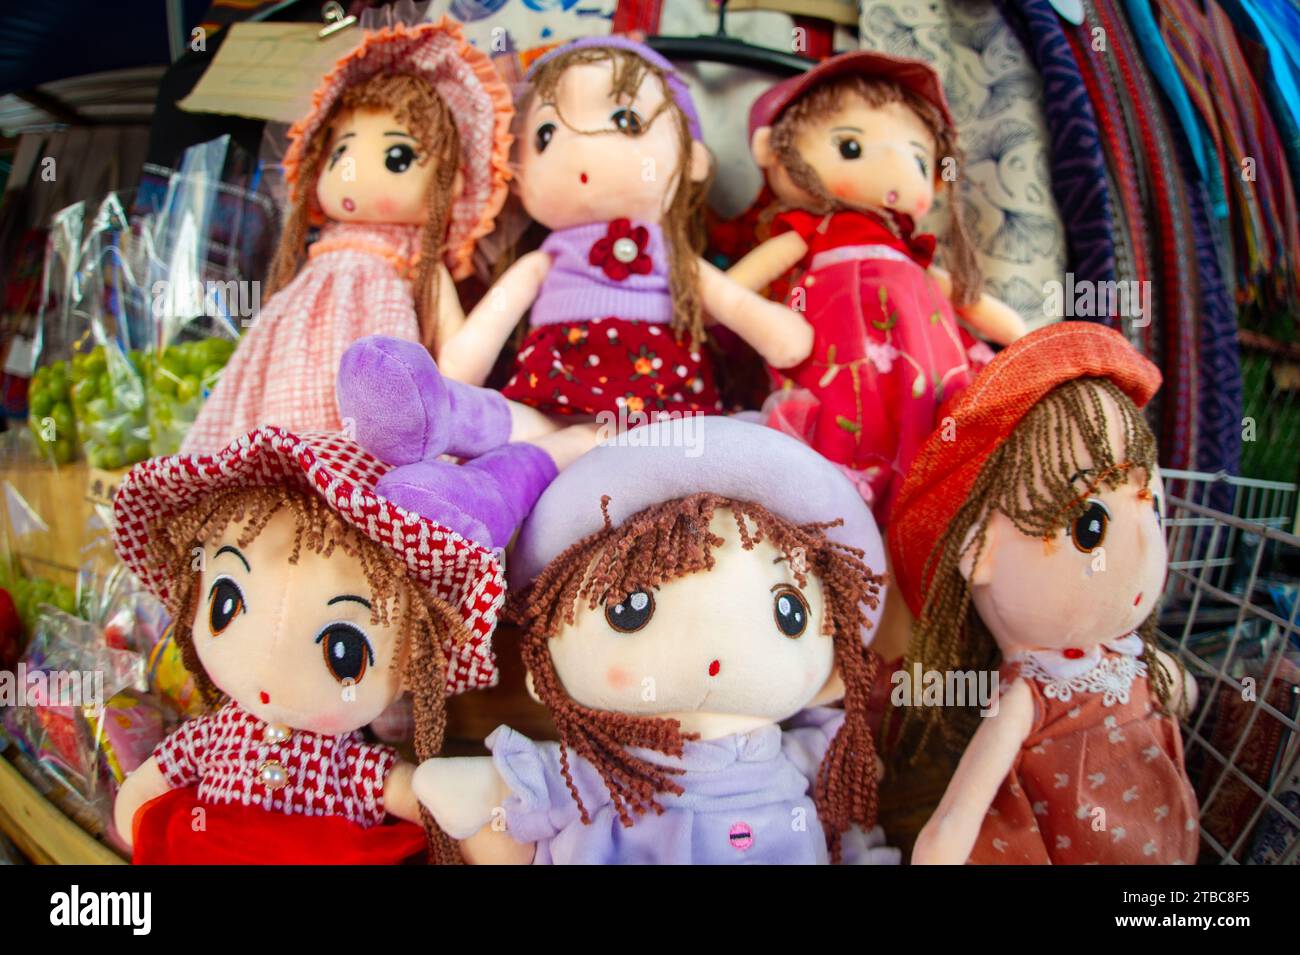 Shop in Thailand of dolls dressed in brightly colored costumes specific to the northern area Stock Photo